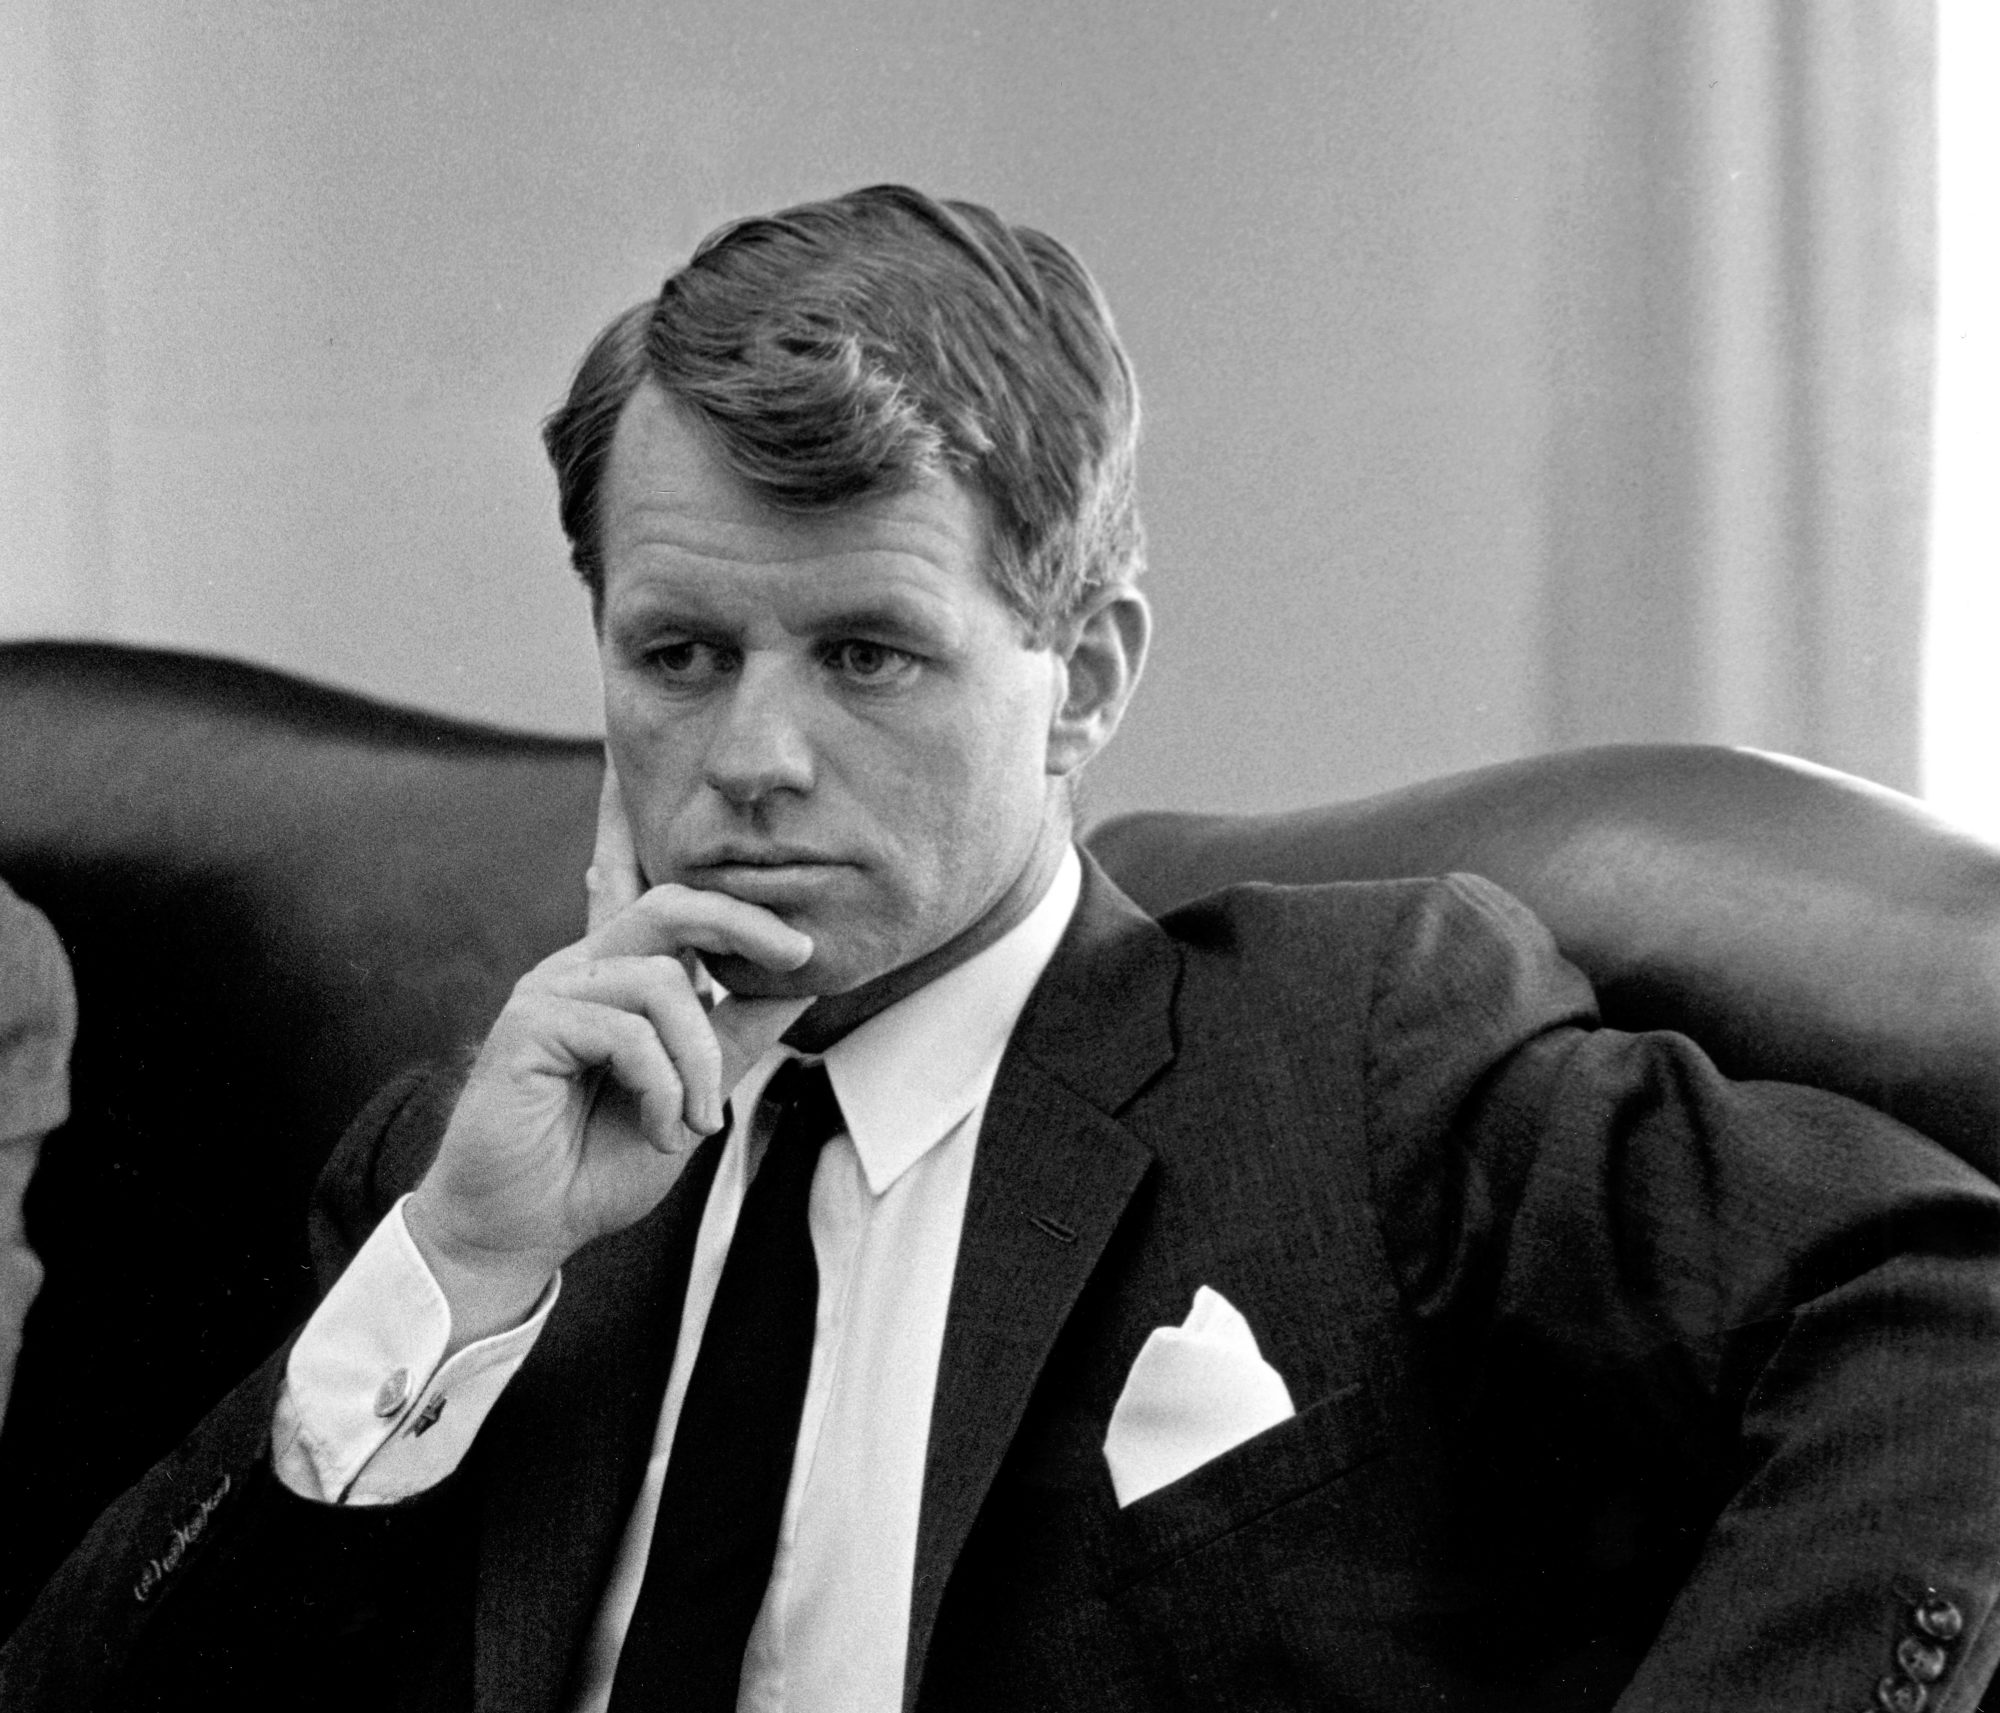 Robert Kennedy and the Great "What if?"